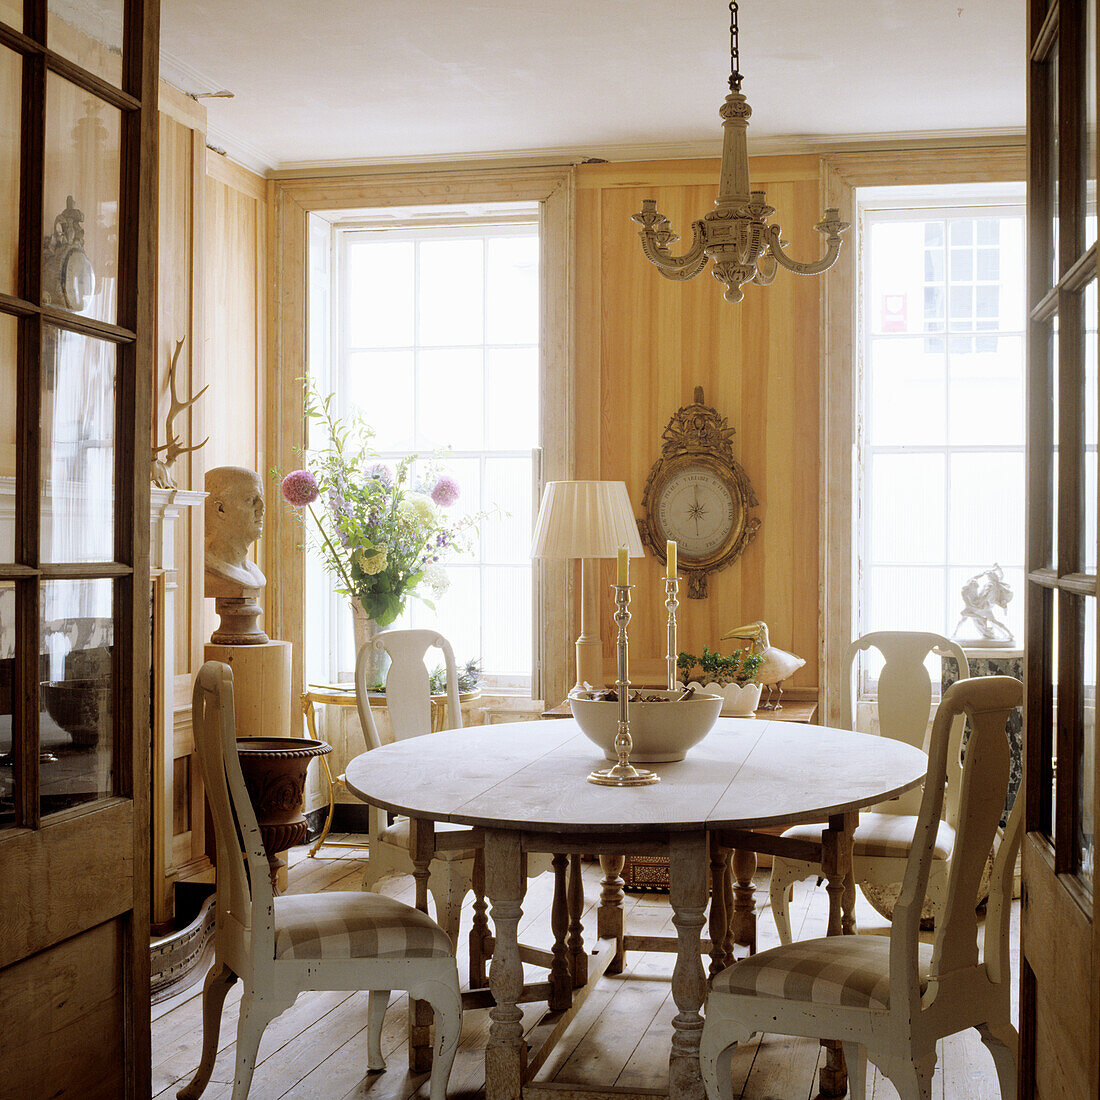 Dining room with round table, vintage chairs and pendant light